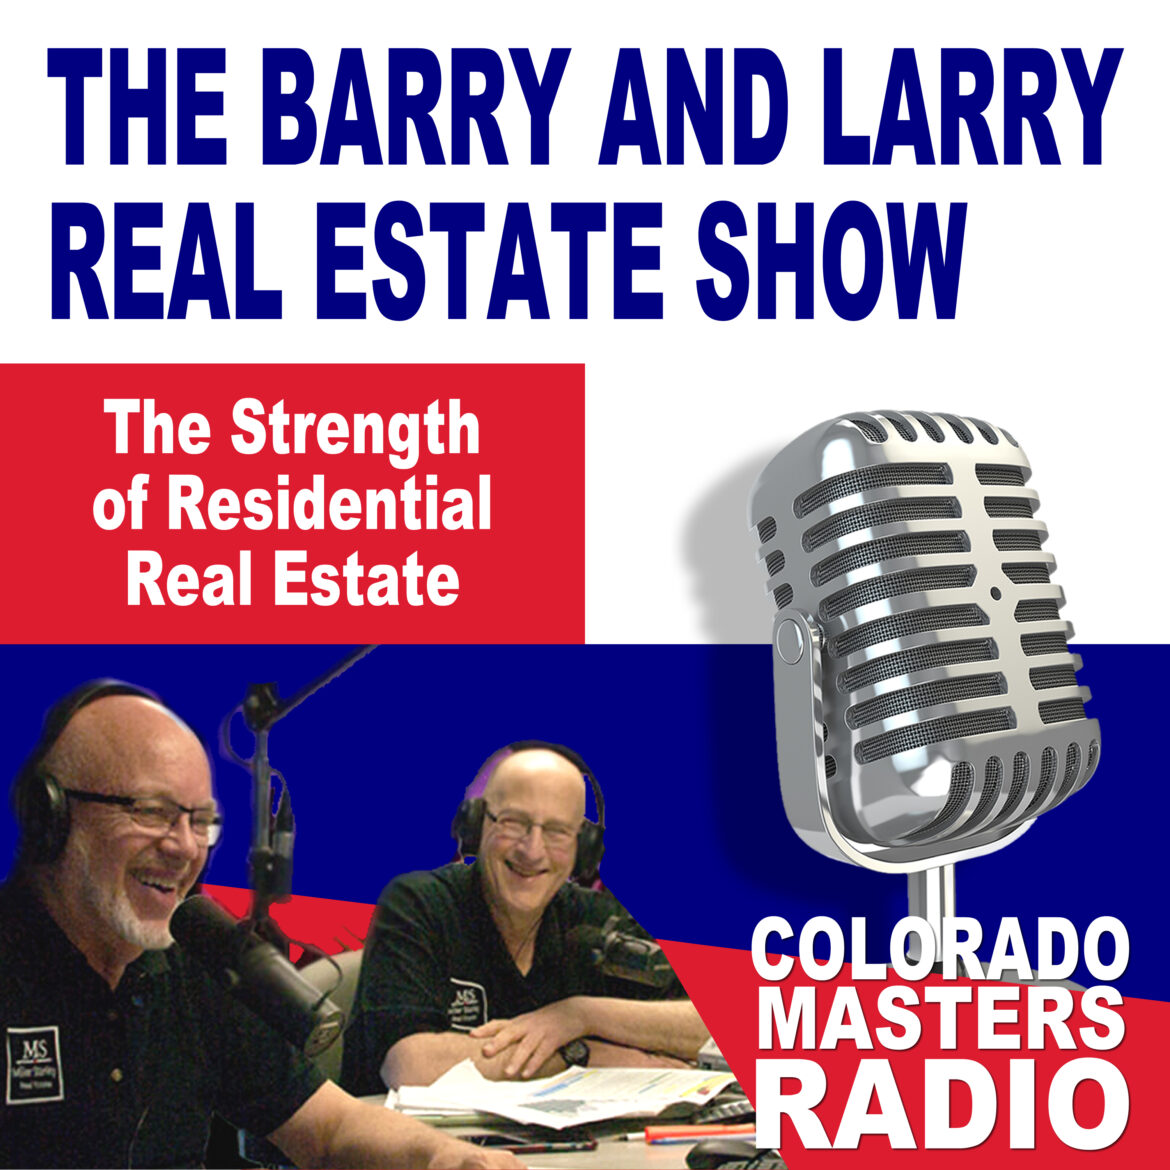 The Larry and Barry Real Estate Show - The Strength of Residential Real Estate